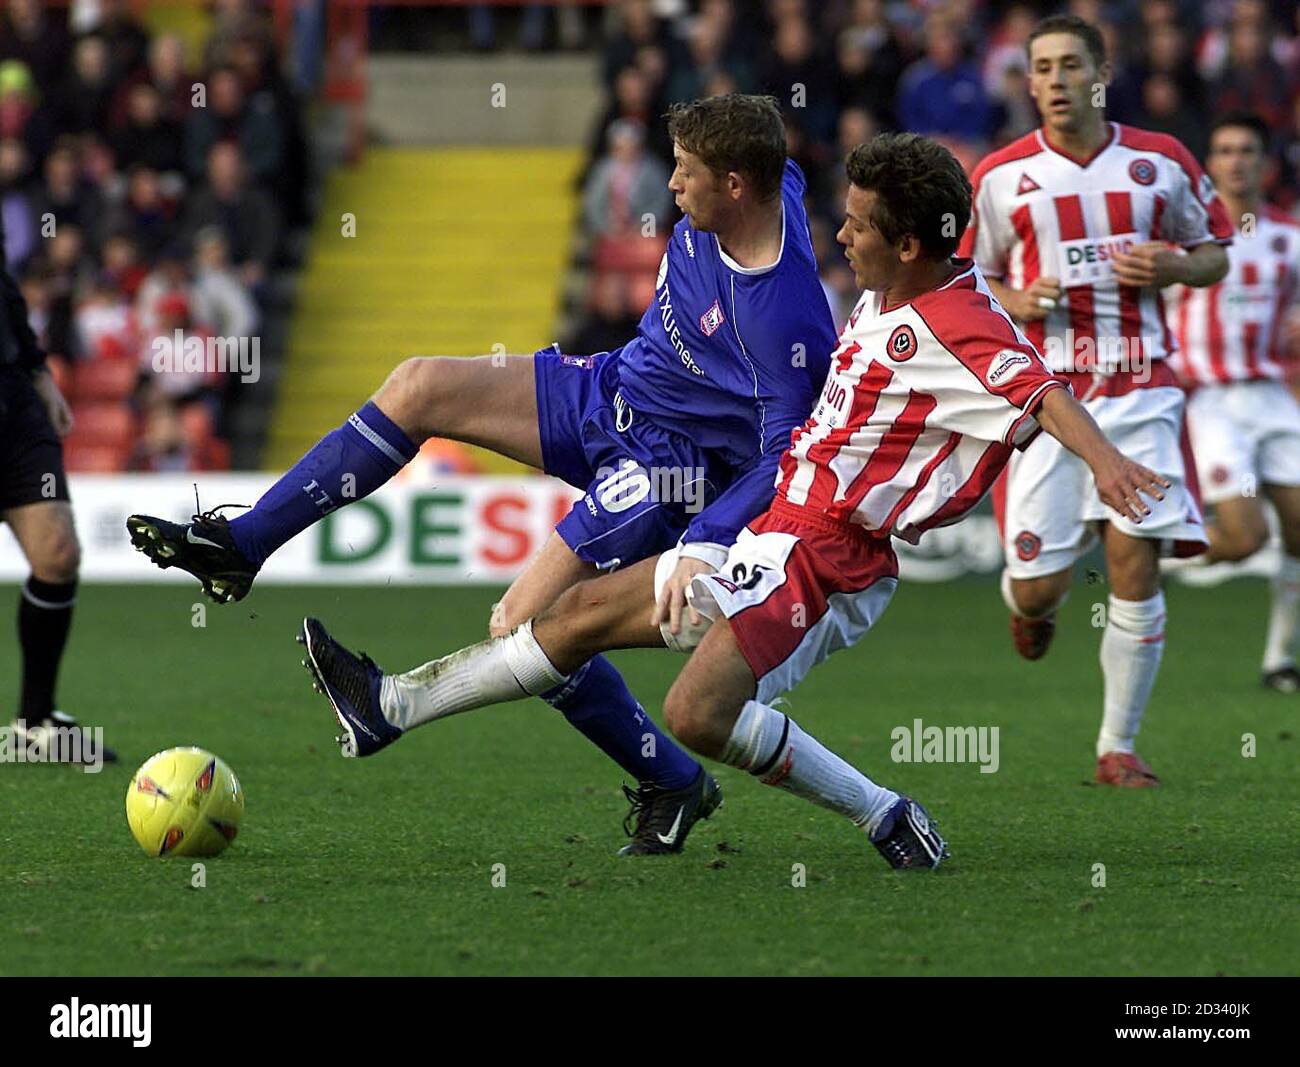 Jon Harley (right) of Sheffield United in action with Ipswich Town's Alun Armstrong, during their Nationwide Division One match at United's Bramall Lane ground. THIS PICTURE CAN ONLY BE USED WITHIN THE CONTEXT OF AN EDITORIAL FEATURE. NO UNOFFICIAL CLUB WEBSITE USE. Stock Photo